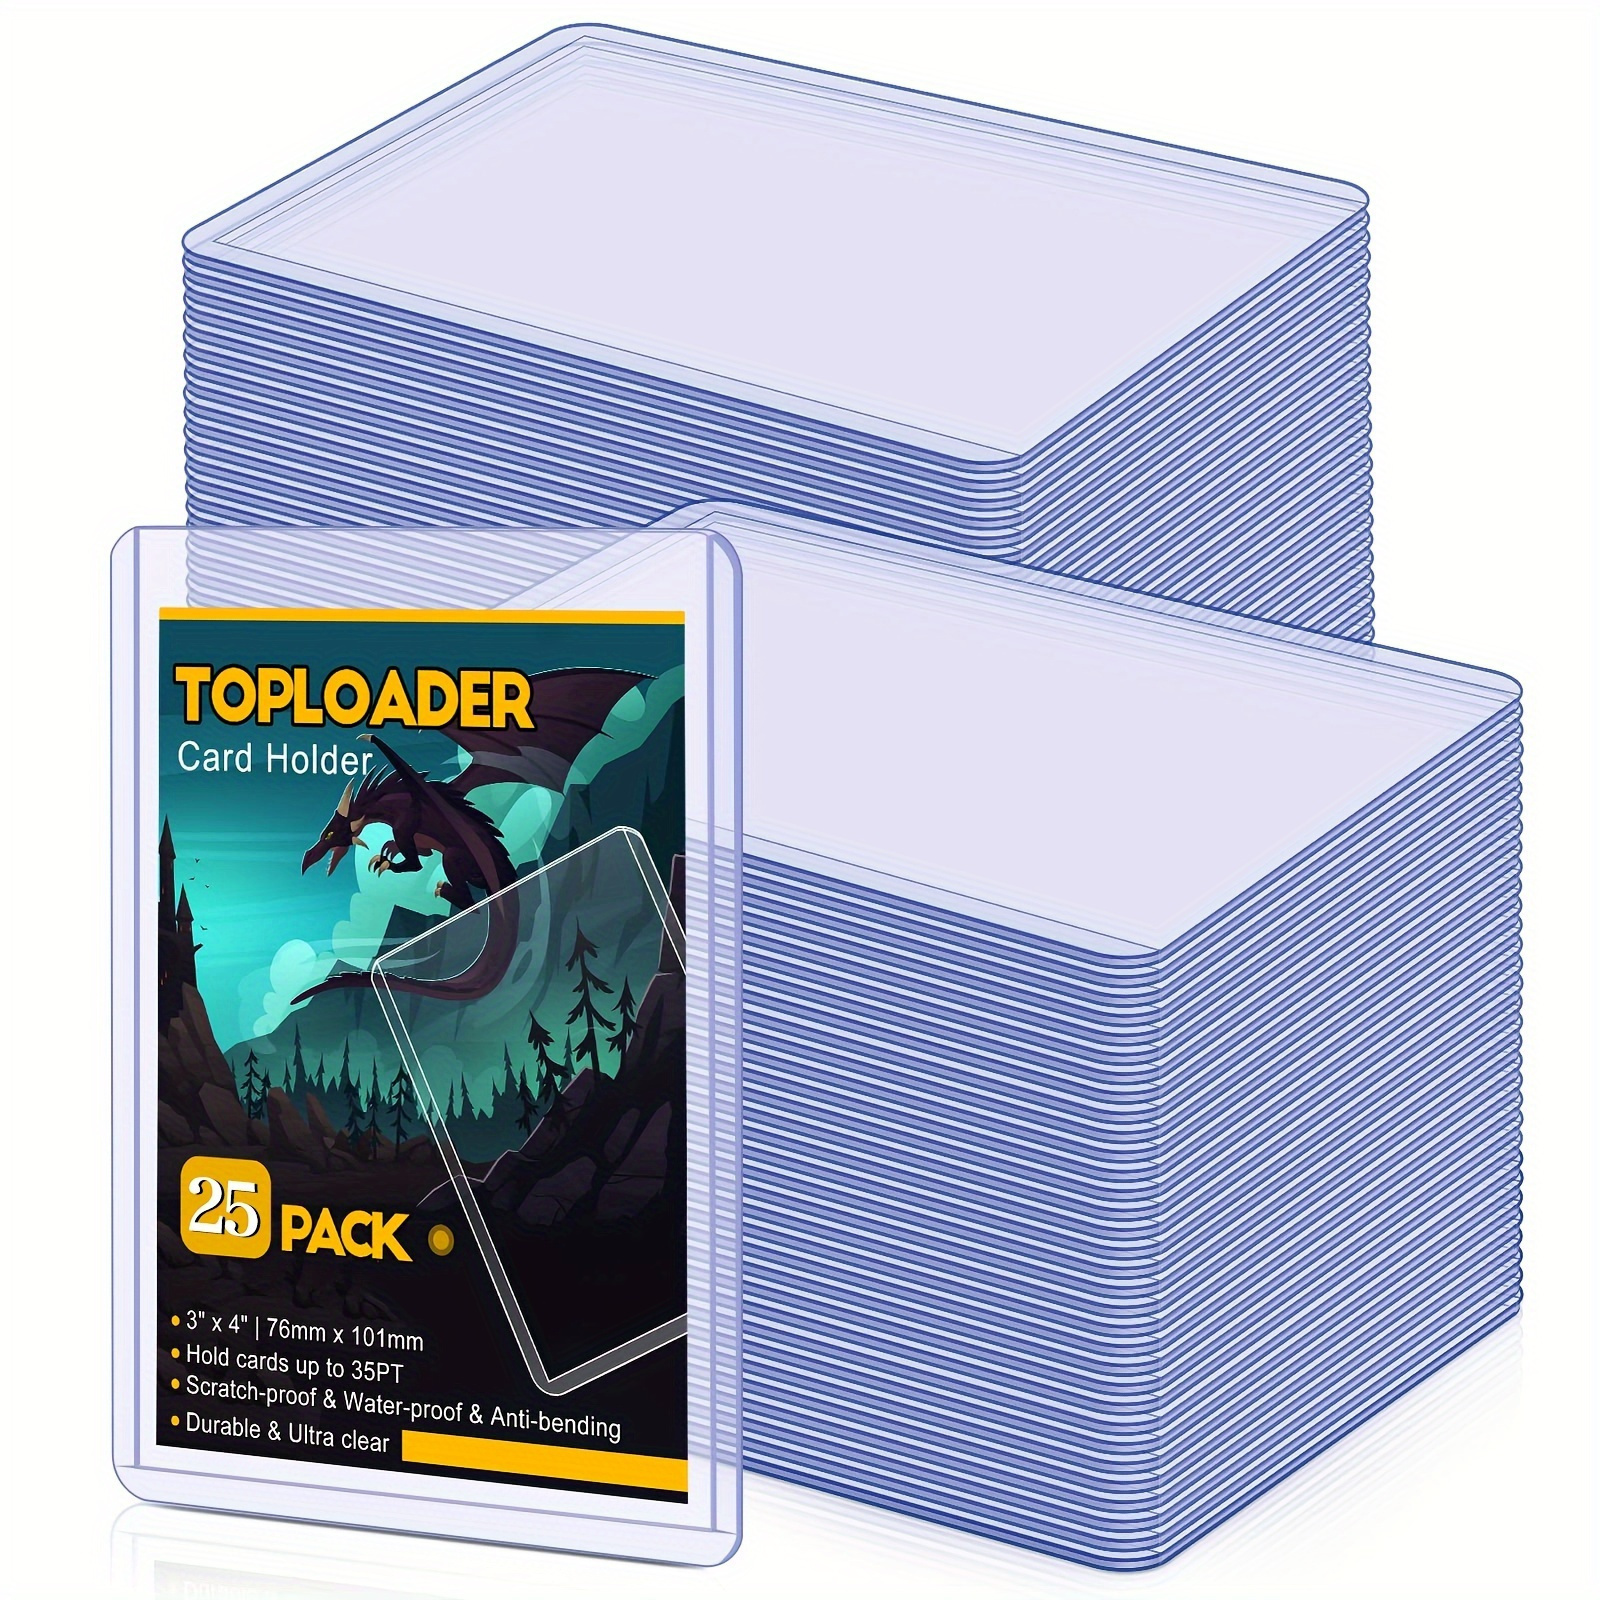 

25-piece Premium Toploader Card Protectors, 35pt Thick Hard Plastic Sleeves, 3"x4" - Ideal For Baseball, Trading & Sports Cards, Light Blue Pvc